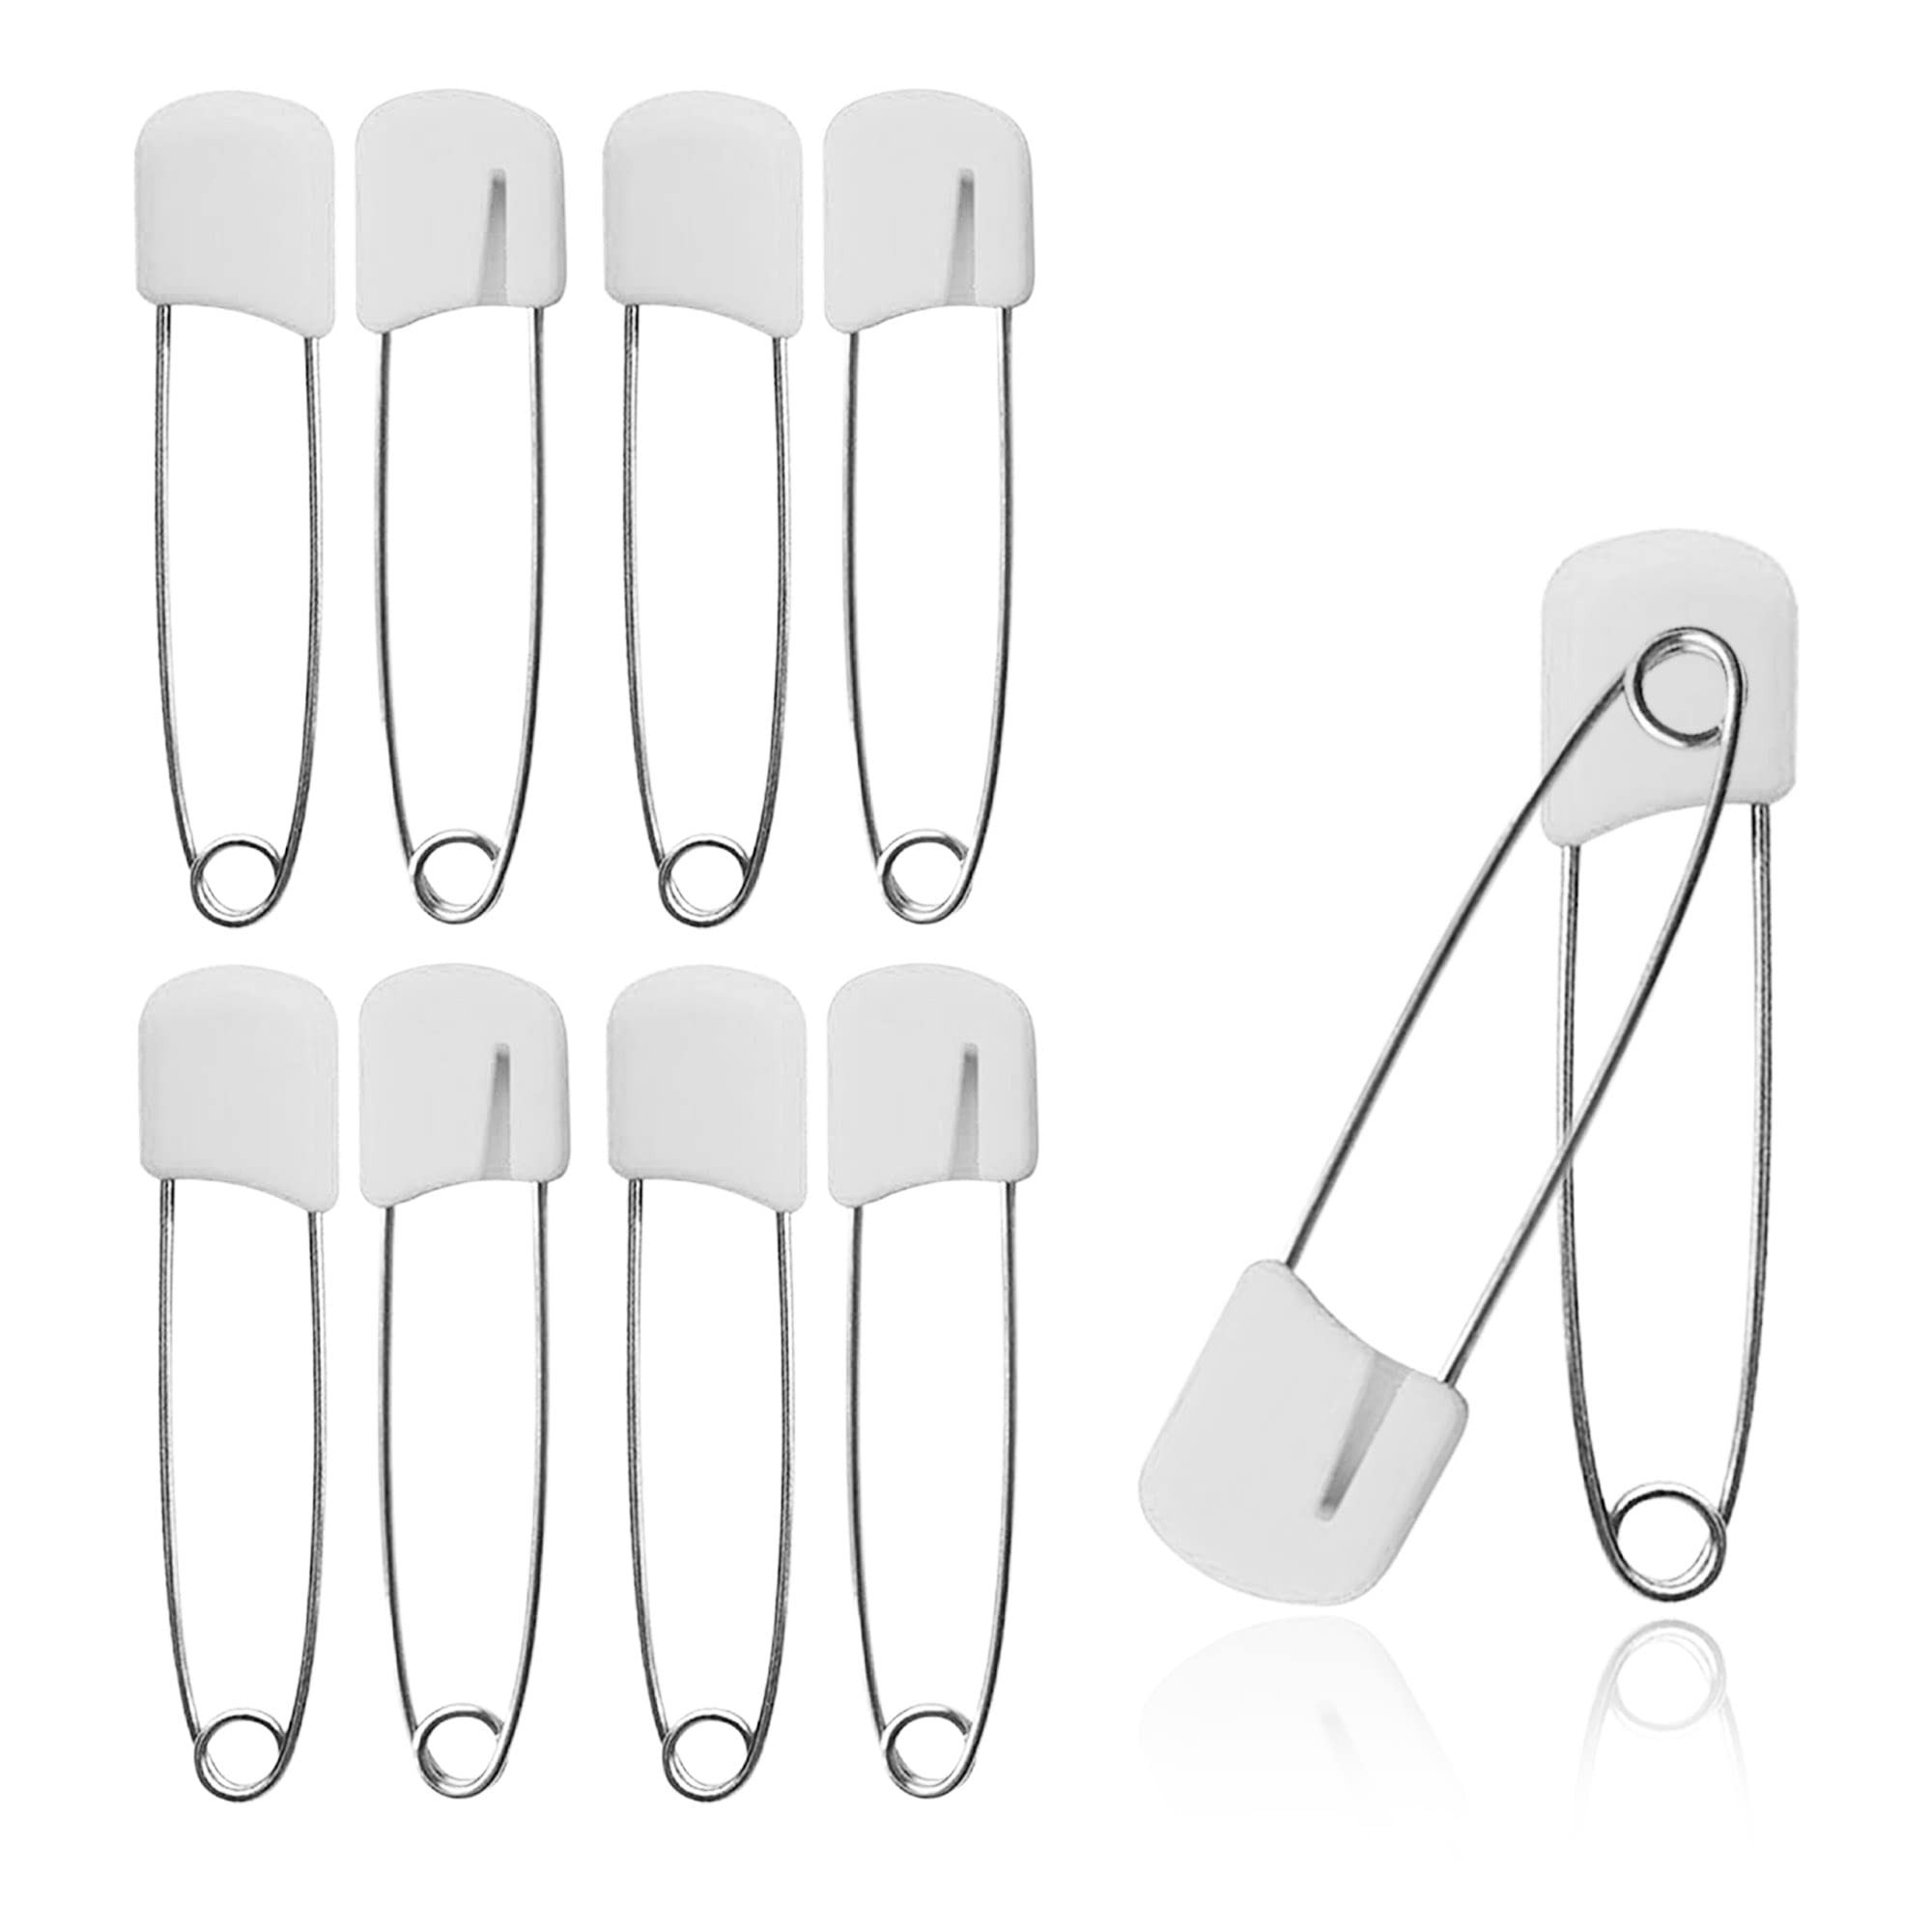 Lxnoap 10 pcs Cloth Diaper Pins Stainless Steel Traditional Safety